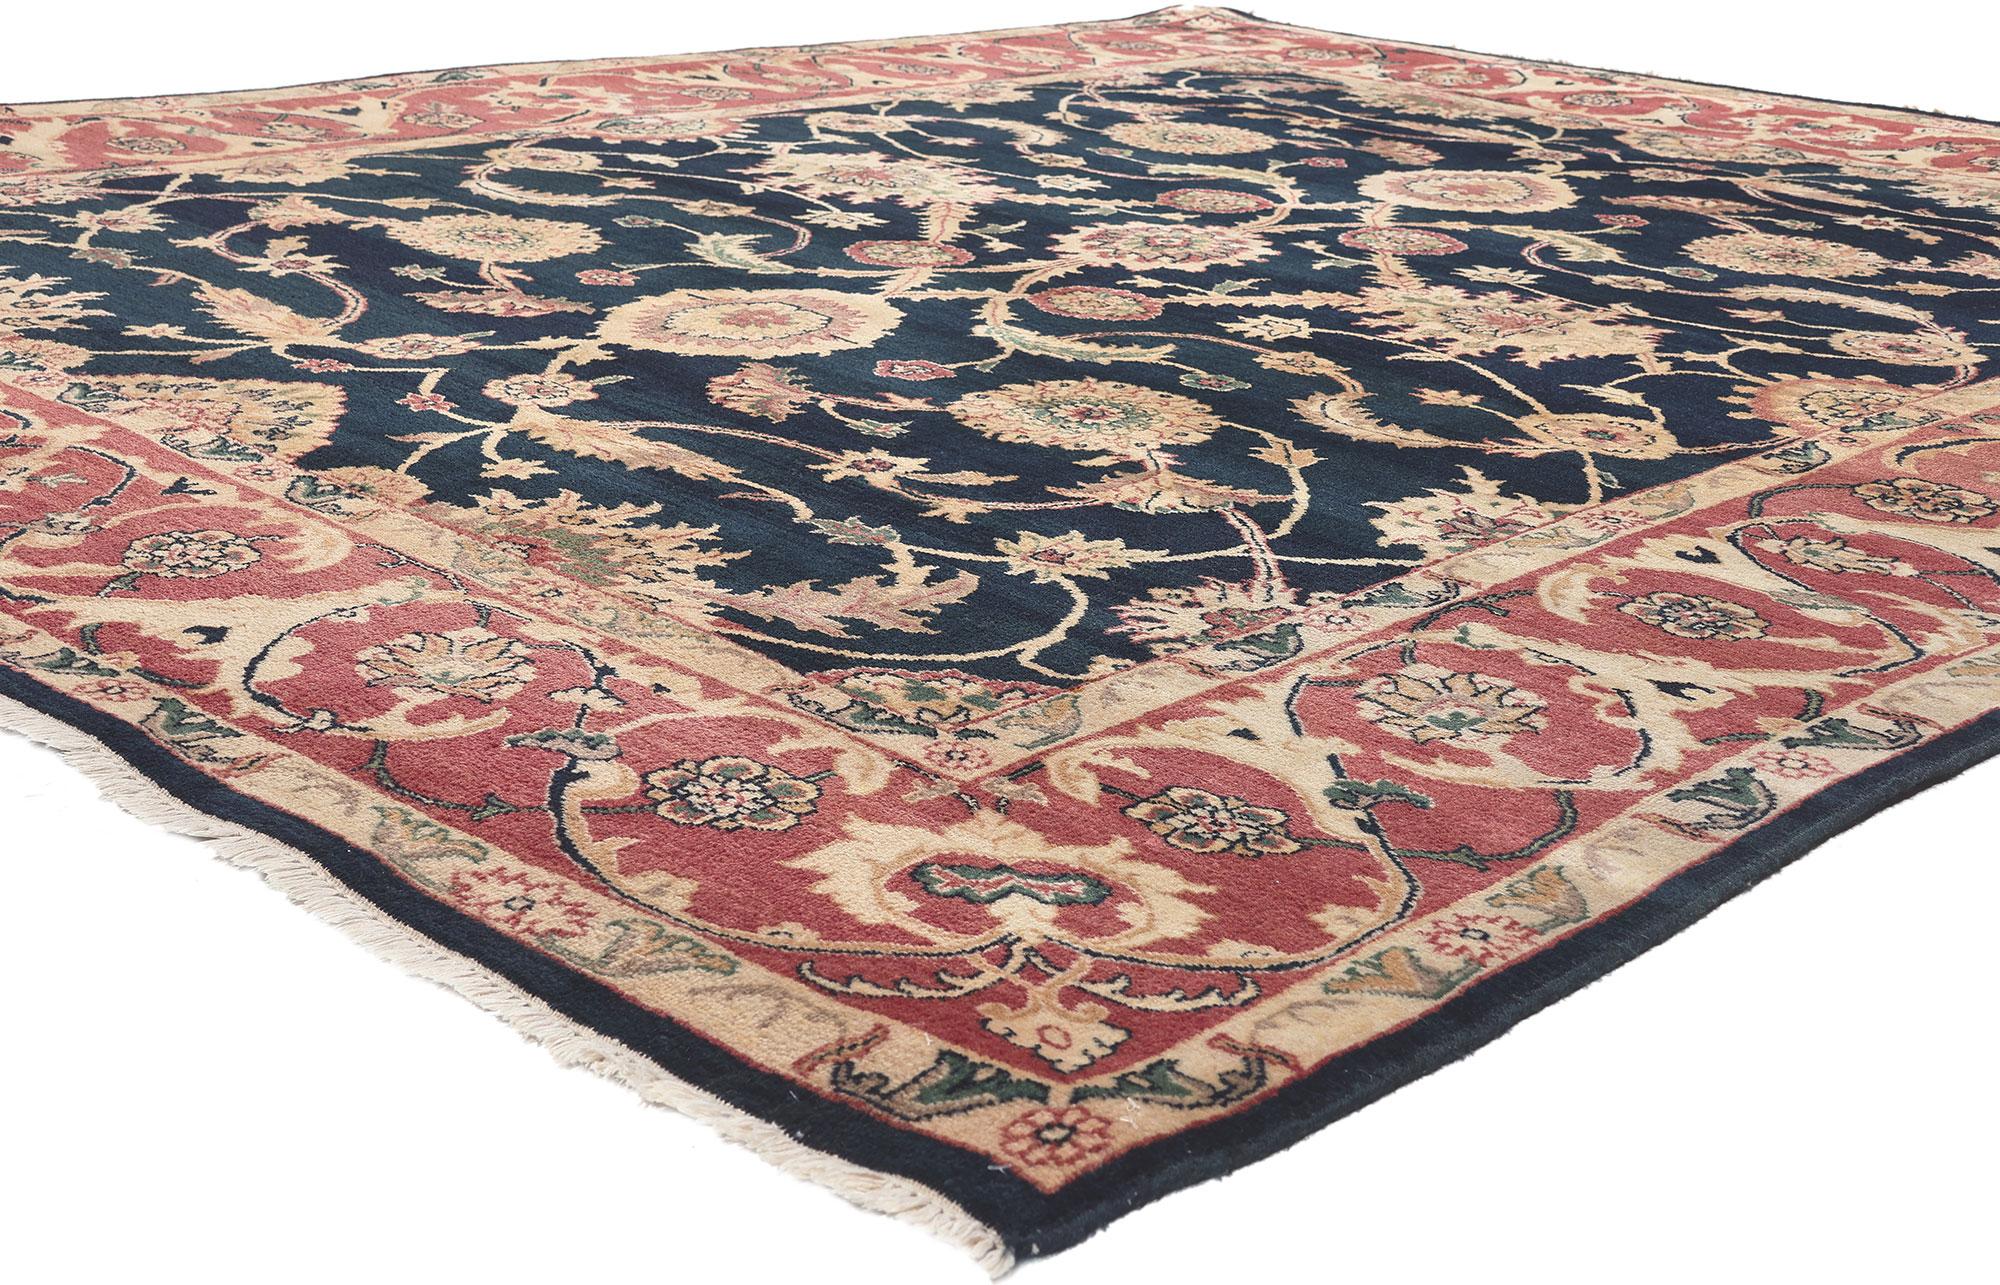 78649 Vintage Indian Rug, 07'11 x 10'01.
​Timeless appeal meets nostalgic charm in this hand knotted wool vintage Indian rug. The intricate botanical design and lively earth-tone colors woven into this piece work together creating an inimitable